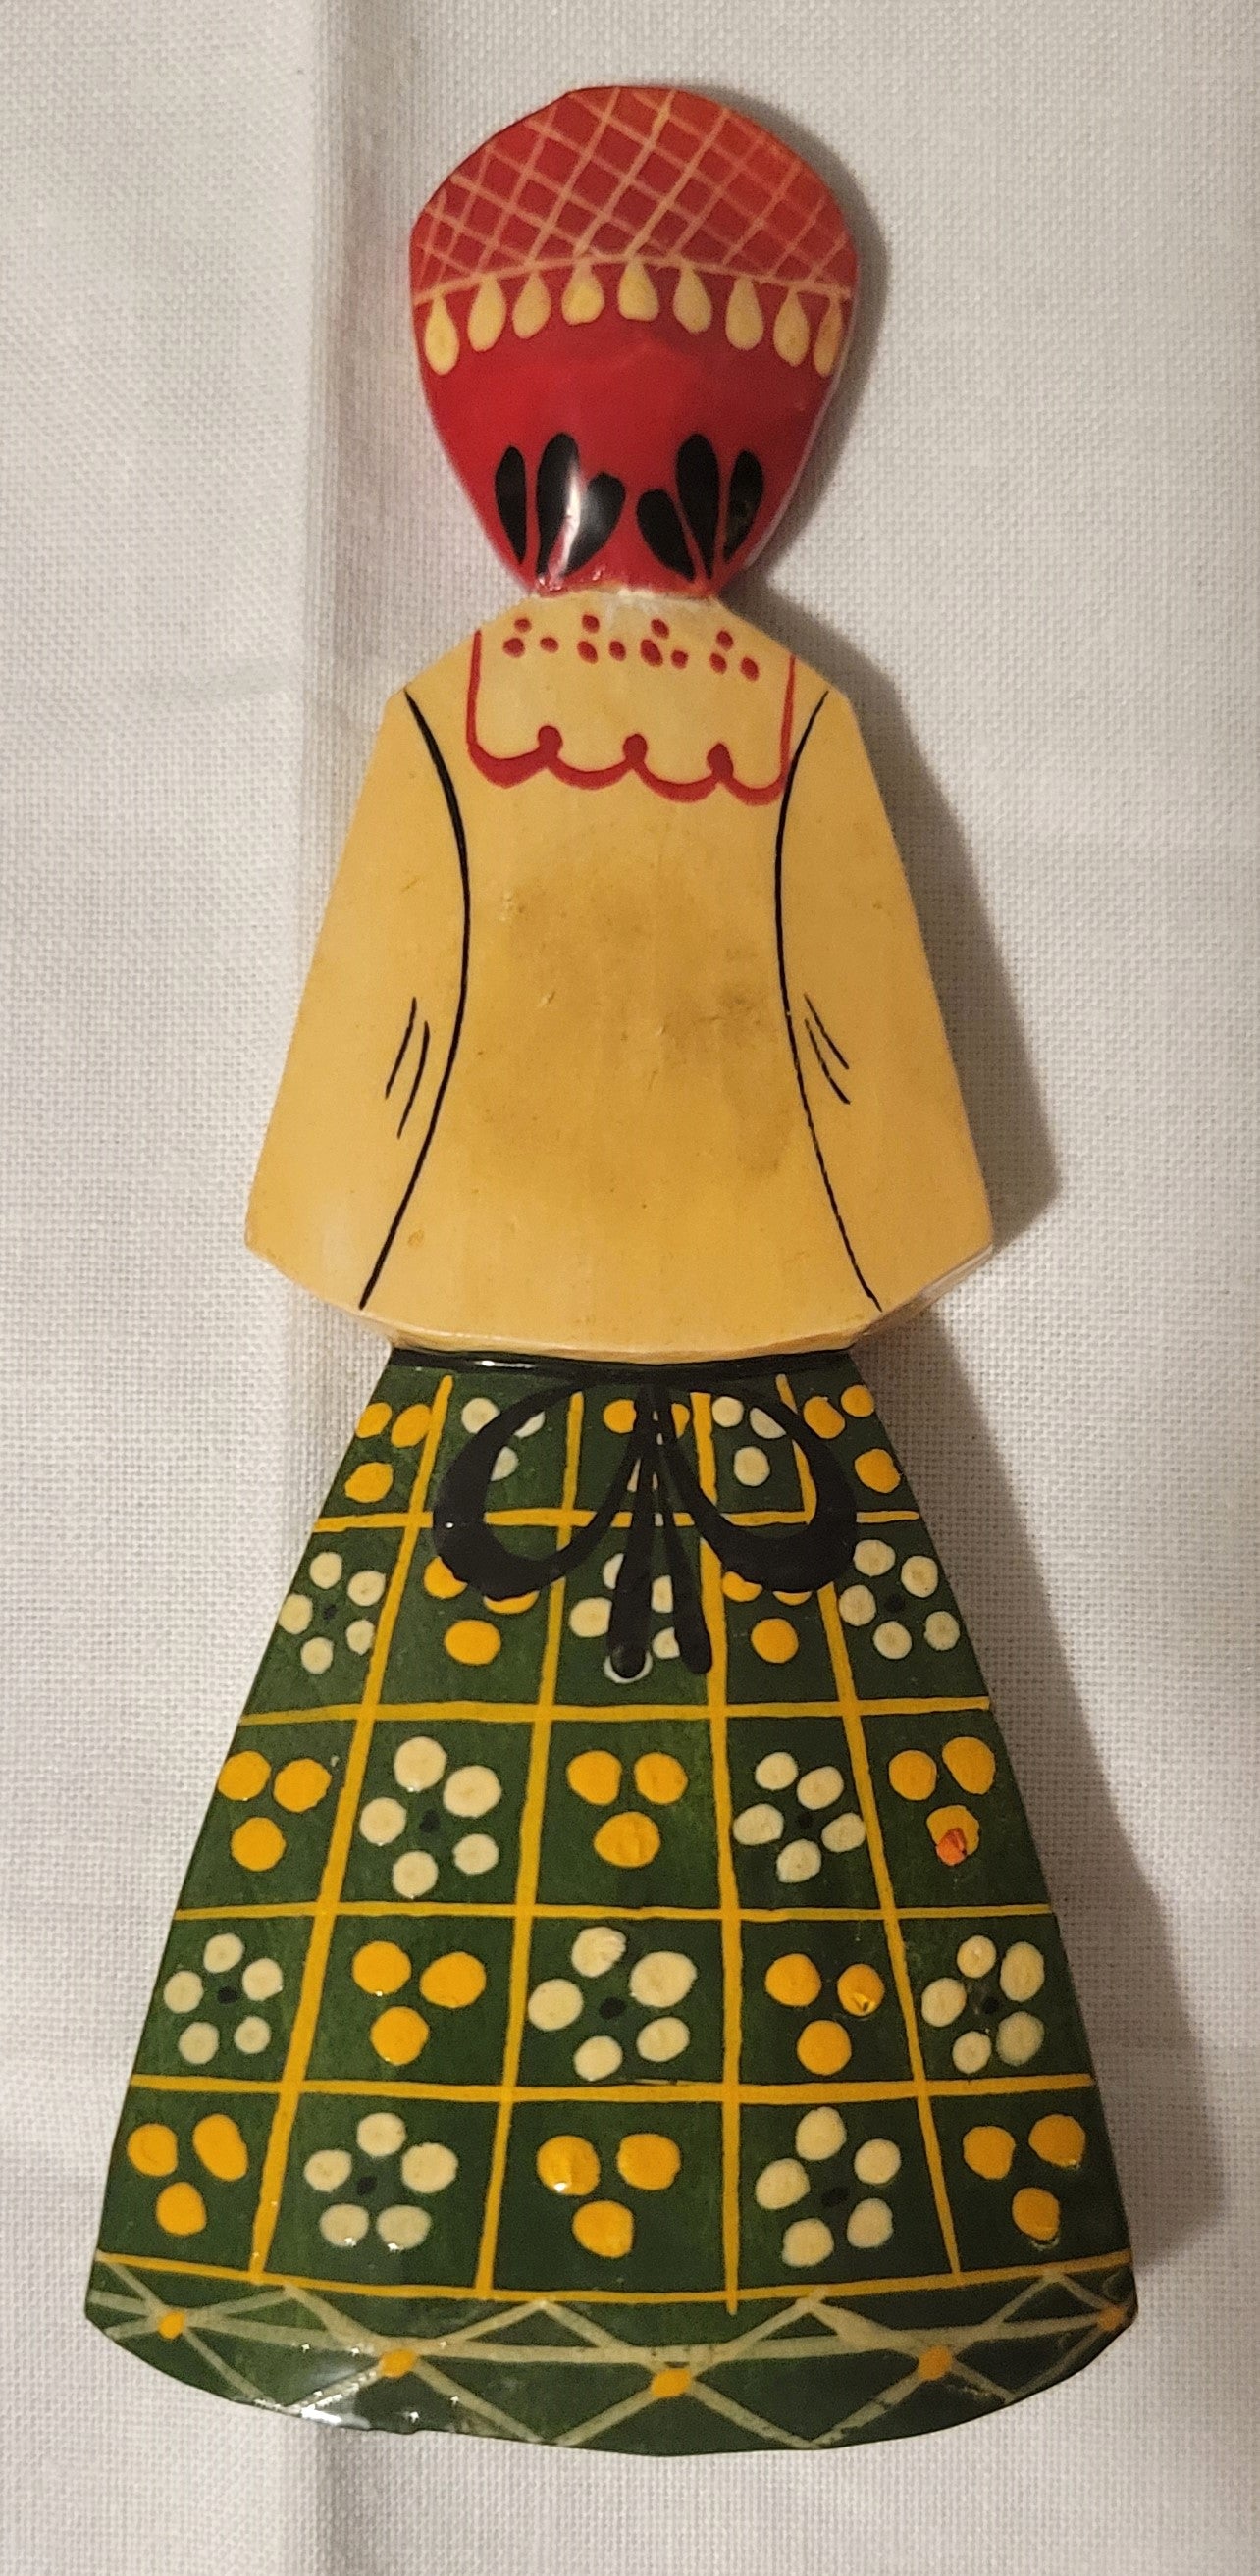 Small wooden doll made in Russia, with traditional dress. Back.